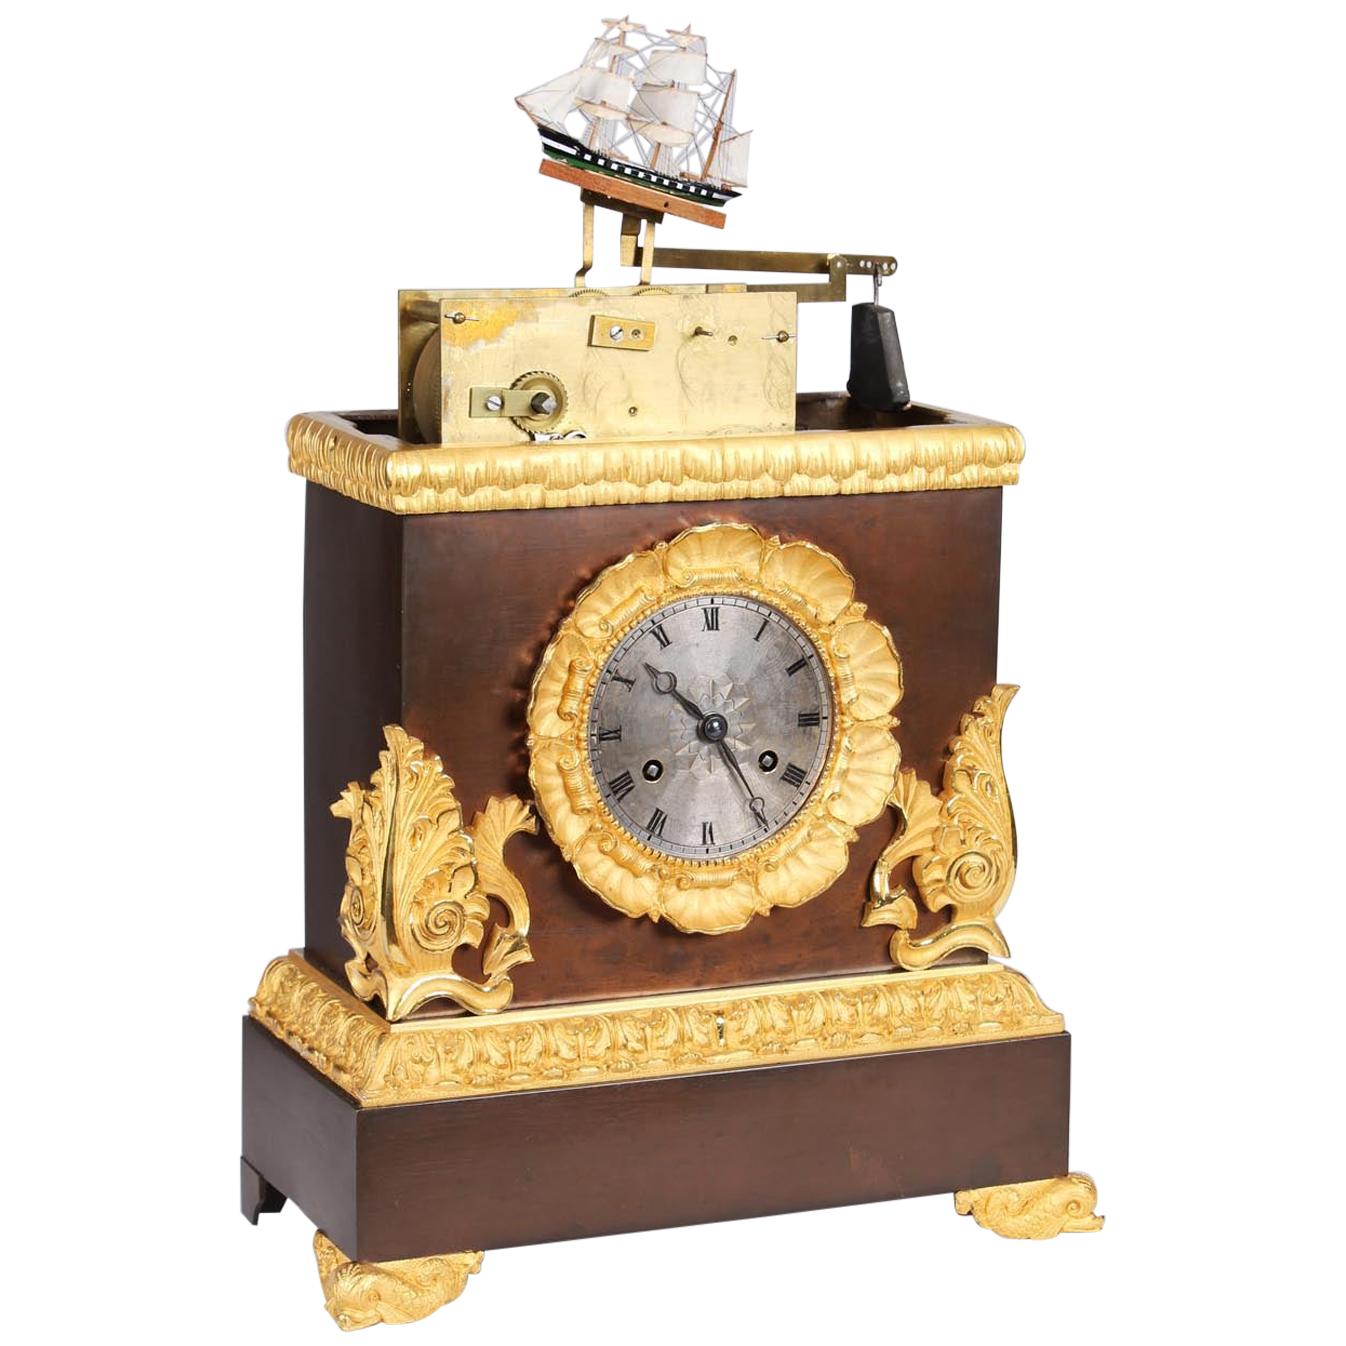 French Mantel Clock, Pendule with Moving Sailboat Automat, Charles X, circa 1840